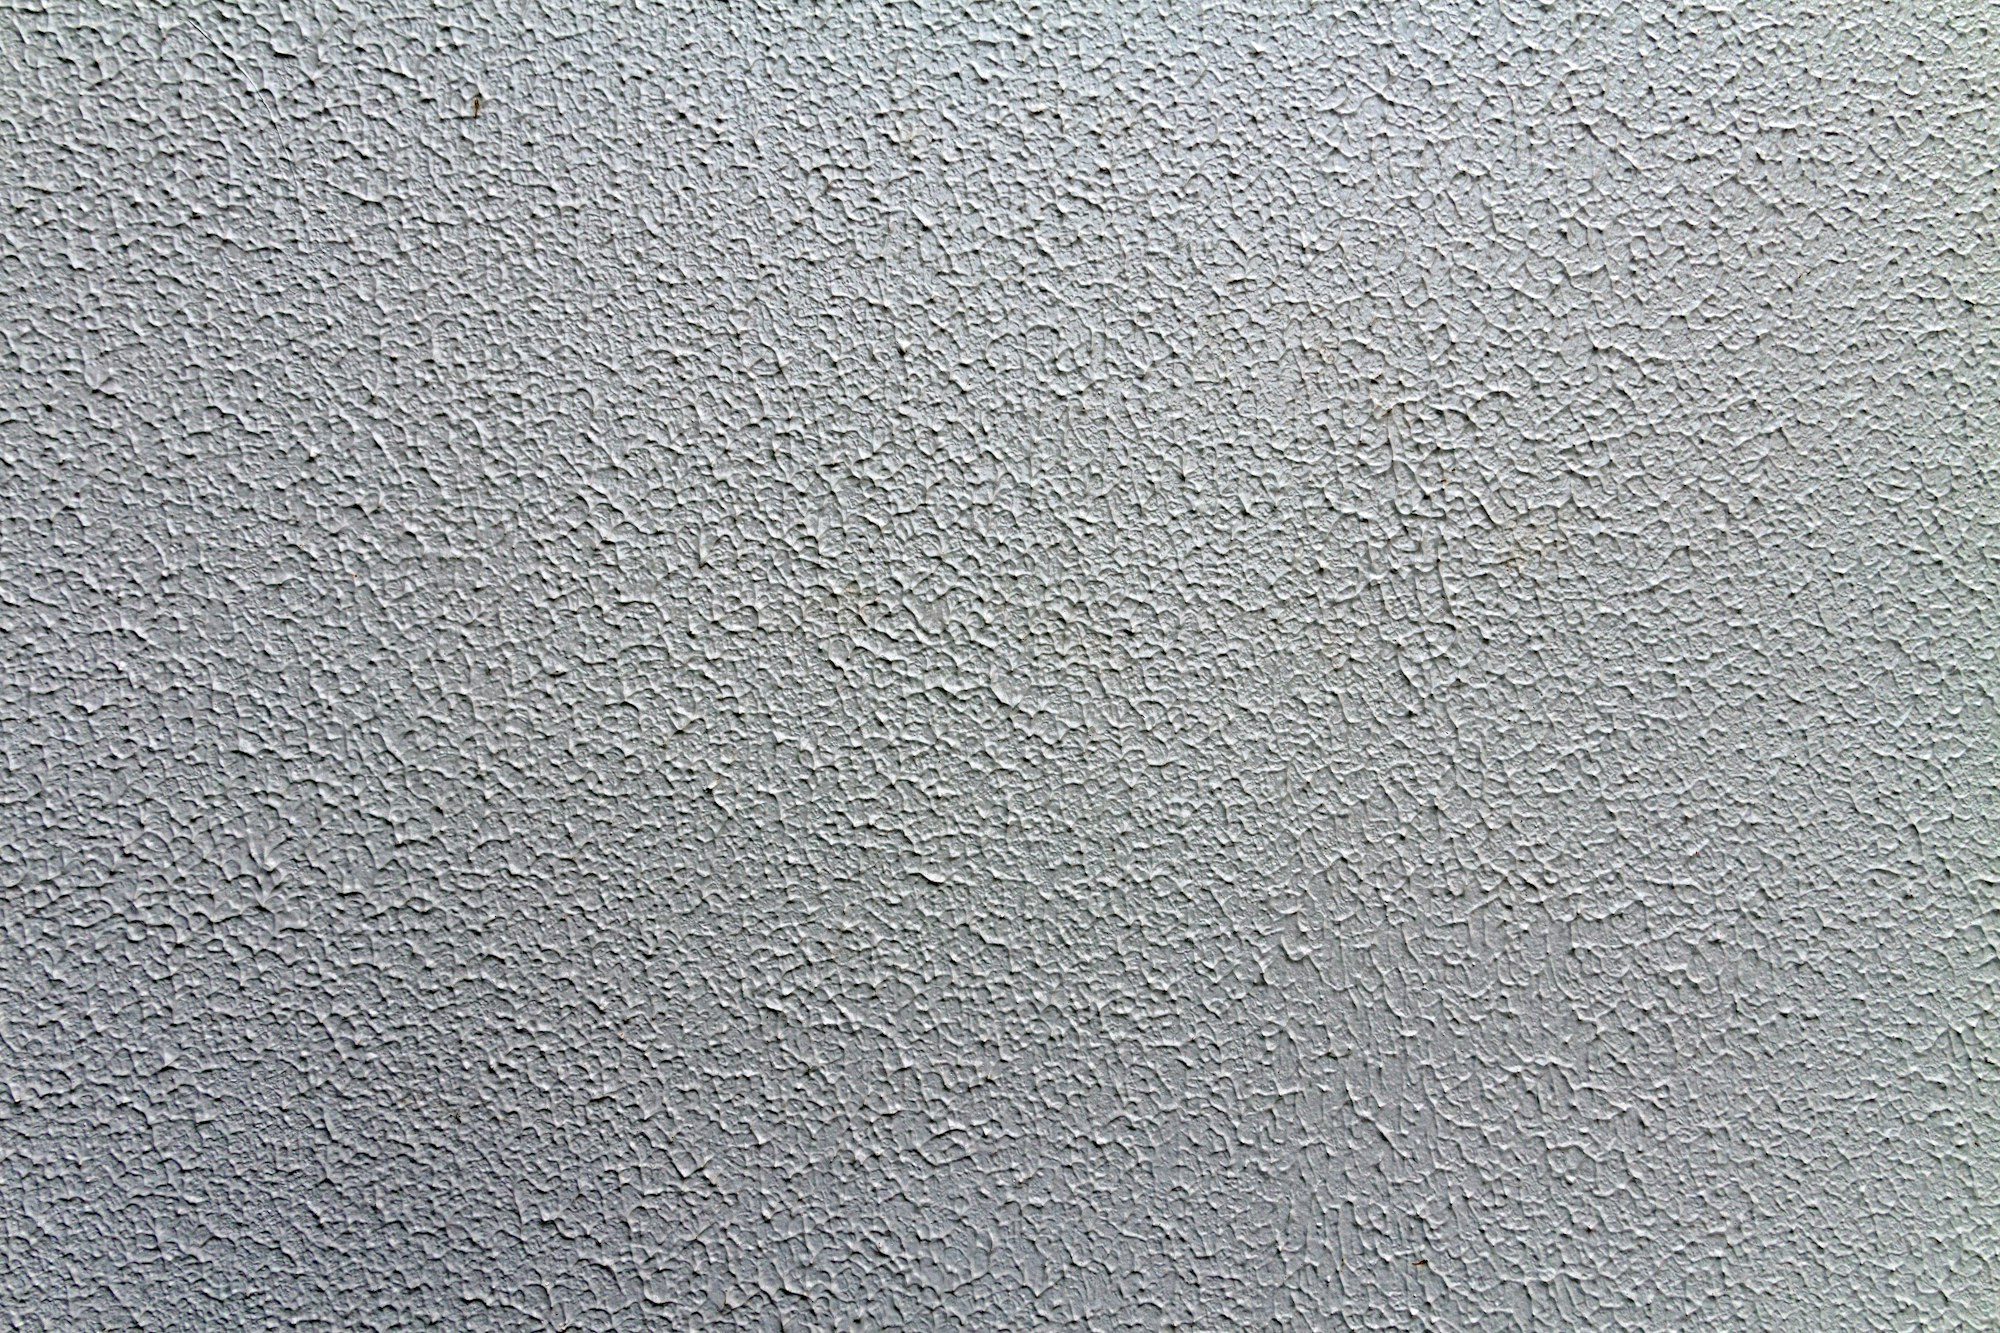 Closeup shot of a white popcorn ceiling surface